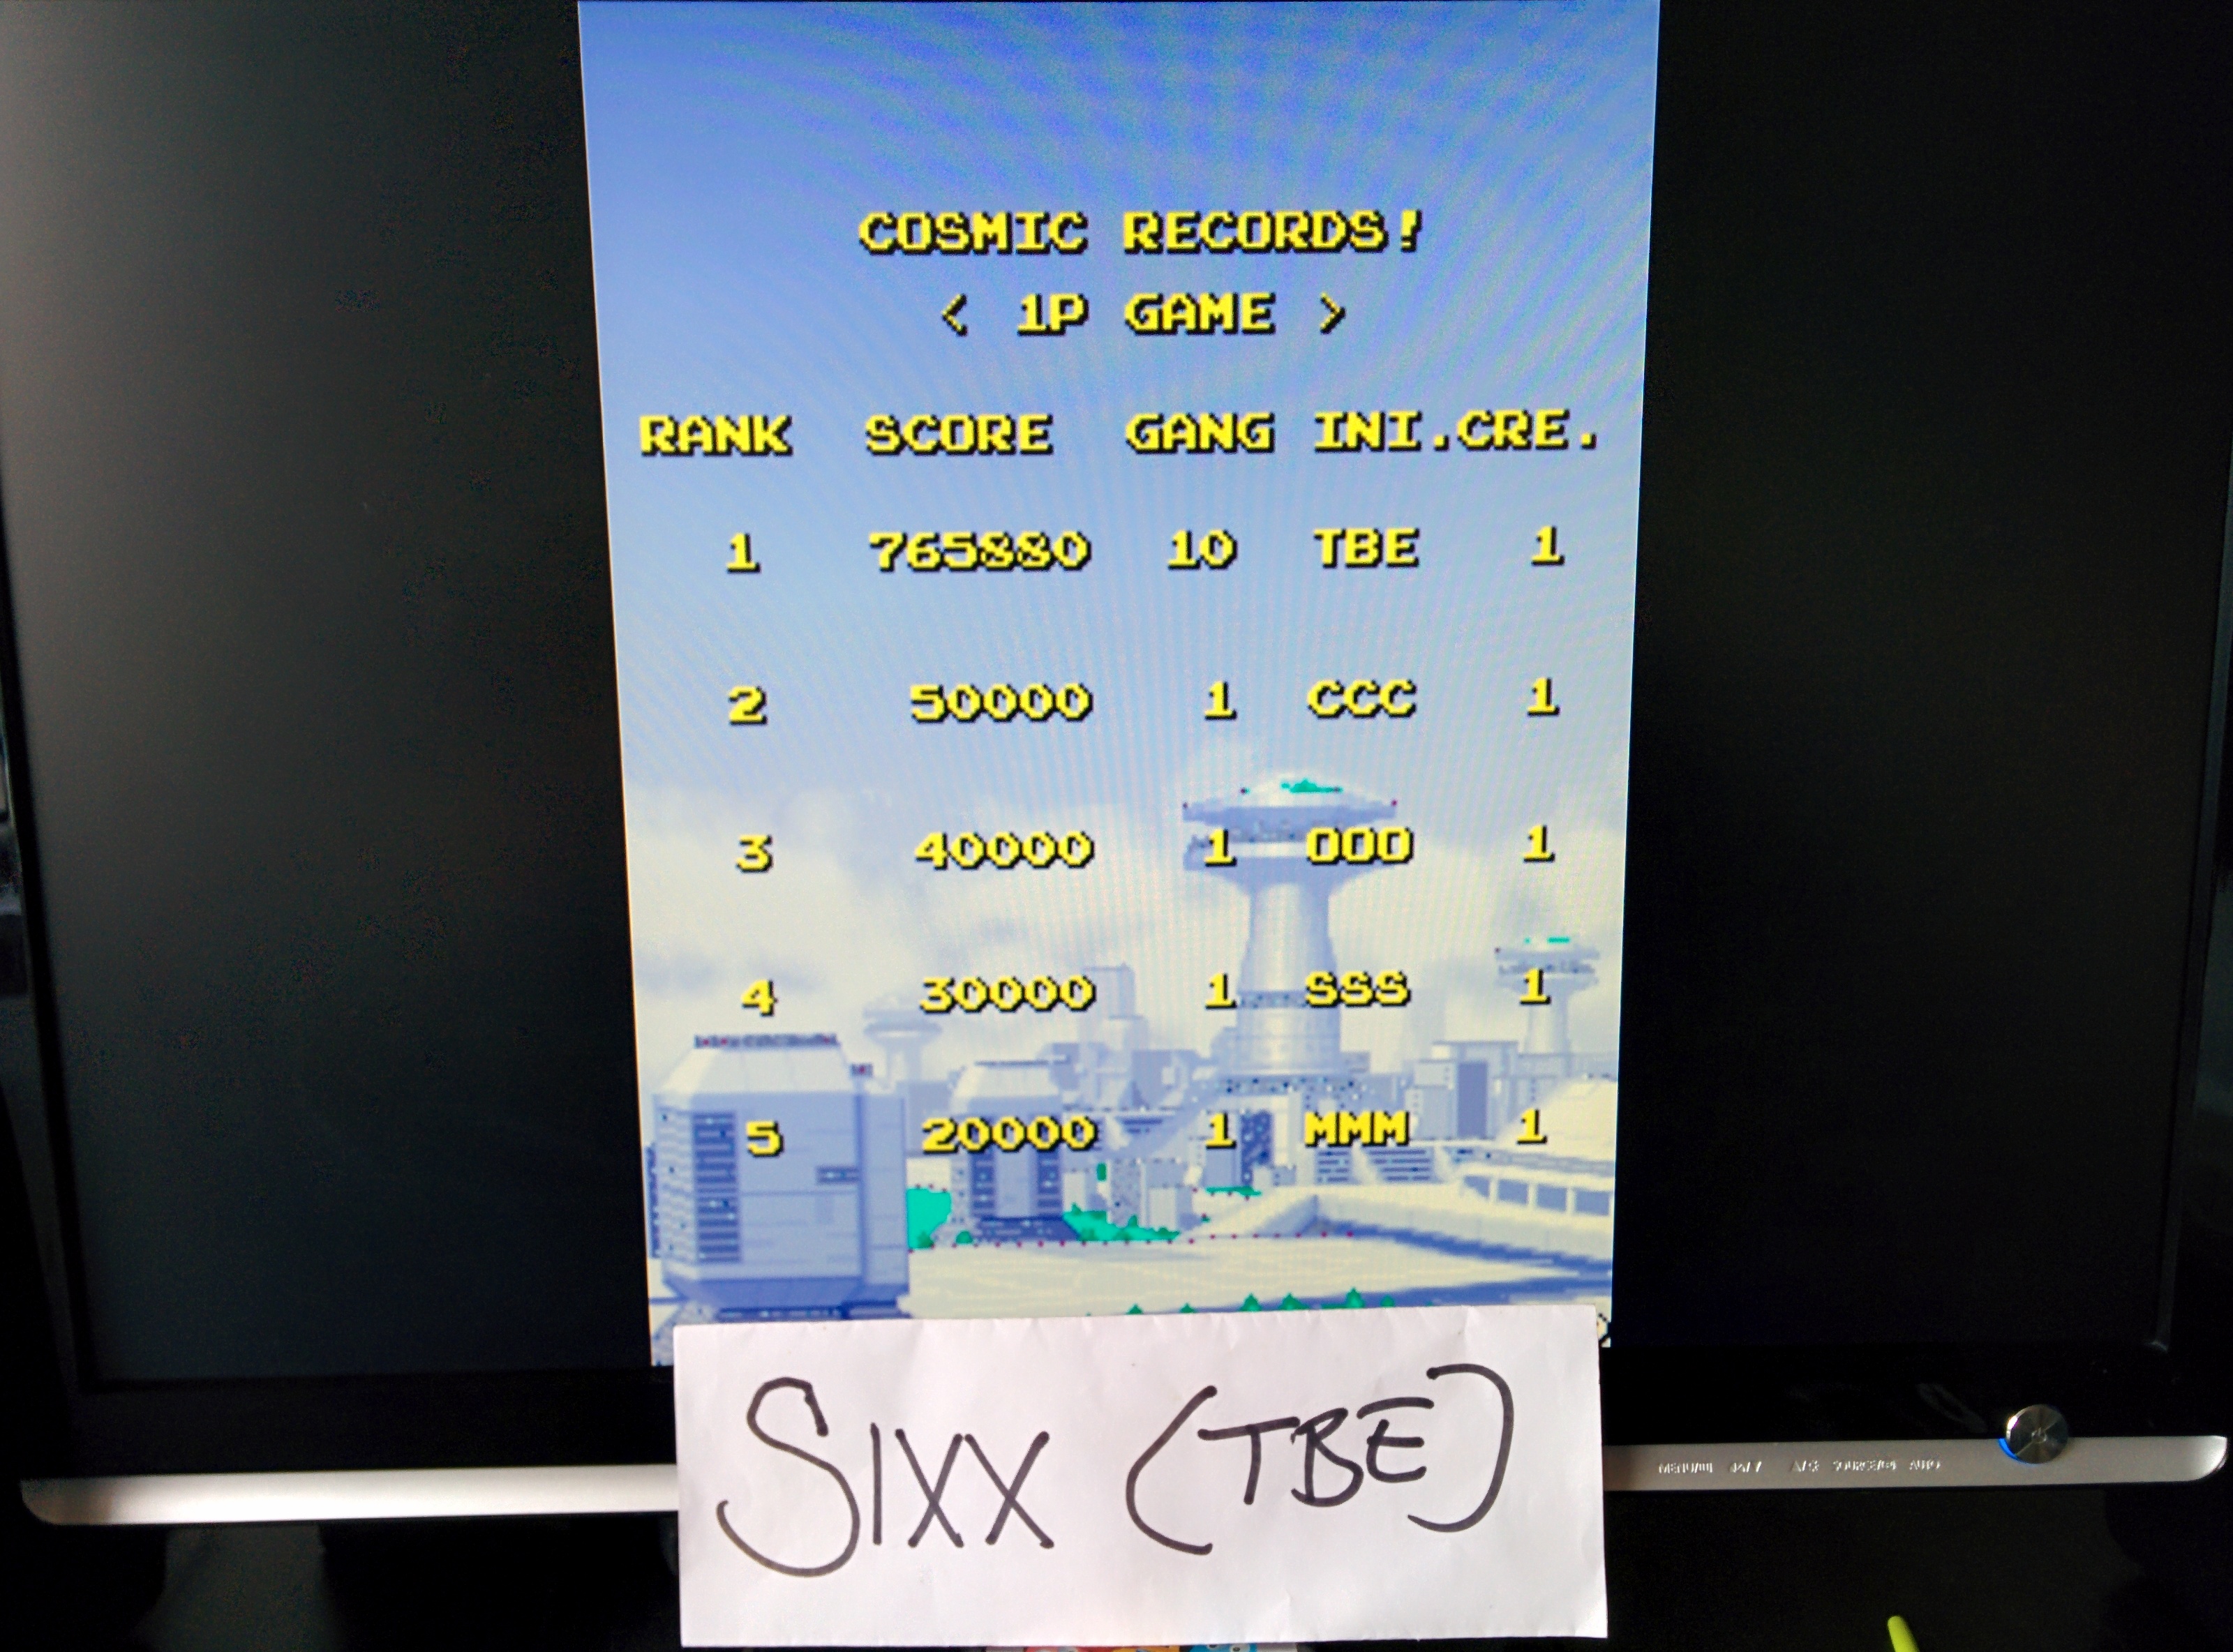 Sixx: Cosmo Gang the Video [cosmogng] (Arcade Emulated / M.A.M.E.) 765,880 points on 2014-07-14 09:35:29